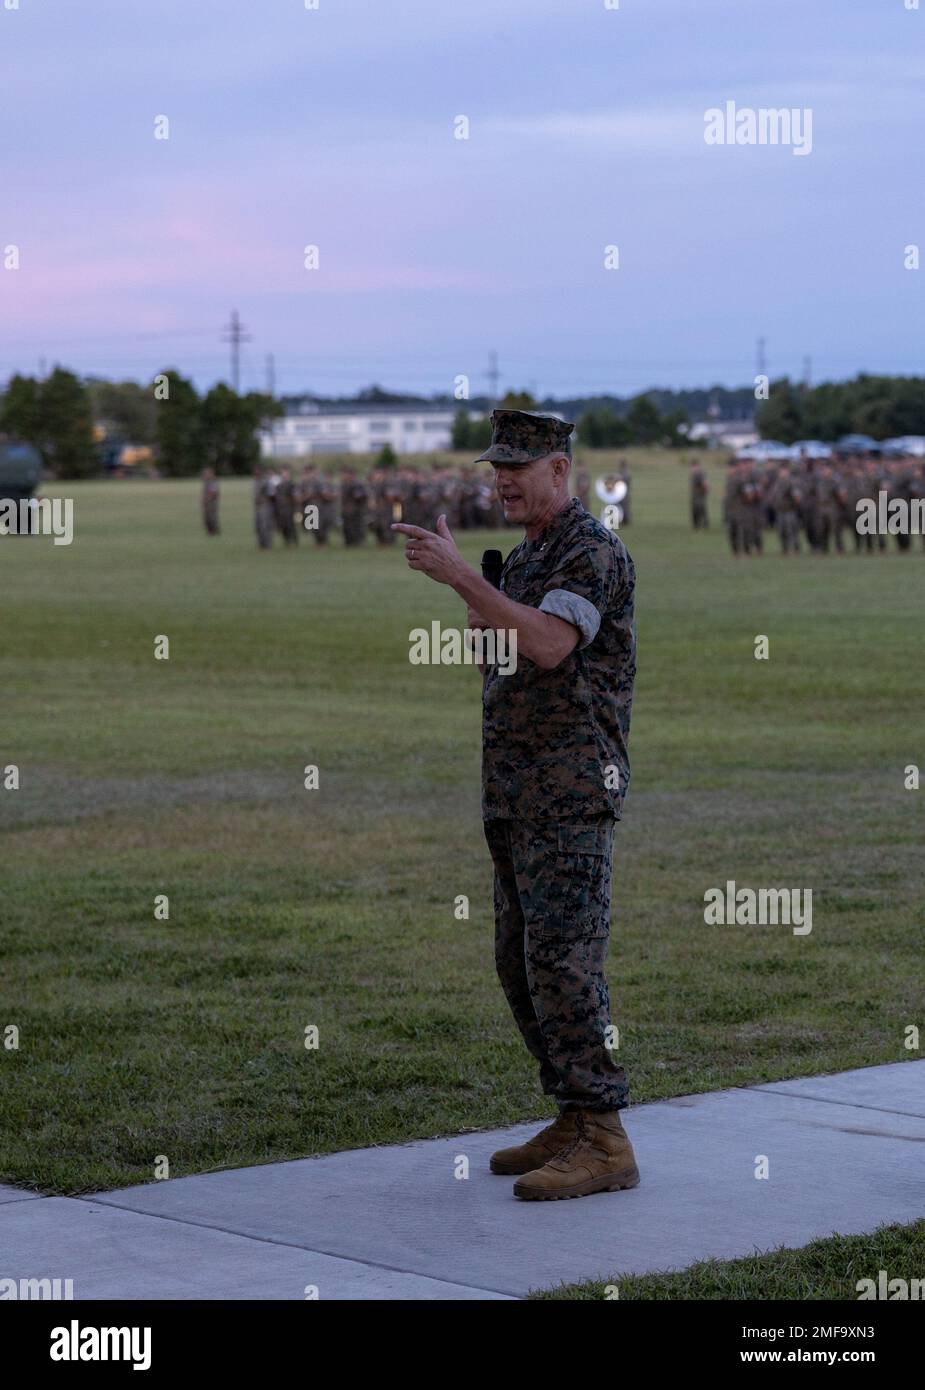 U.S. Marine Corps Maj. Gen. Francis Donovan, the outgoing commanding general (CG) of 2d Marine Division (MARDIV), gives remarks at a change of command ceremony on Camp Lejeune, North Carolina, Aug. 18, 2022. “Competency and lethality reside in these formations lined up in front of us,” explained Donovan. “Every challenge I have given them, they have exceeded by expectations… I couldn’t be more proud of these Marines and Sailors.” During the ceremony, Donovan relinquished command of the division to Brig. Gen. Calvert Worth, the incoming CG of 2d MARDIV. Stock Photo